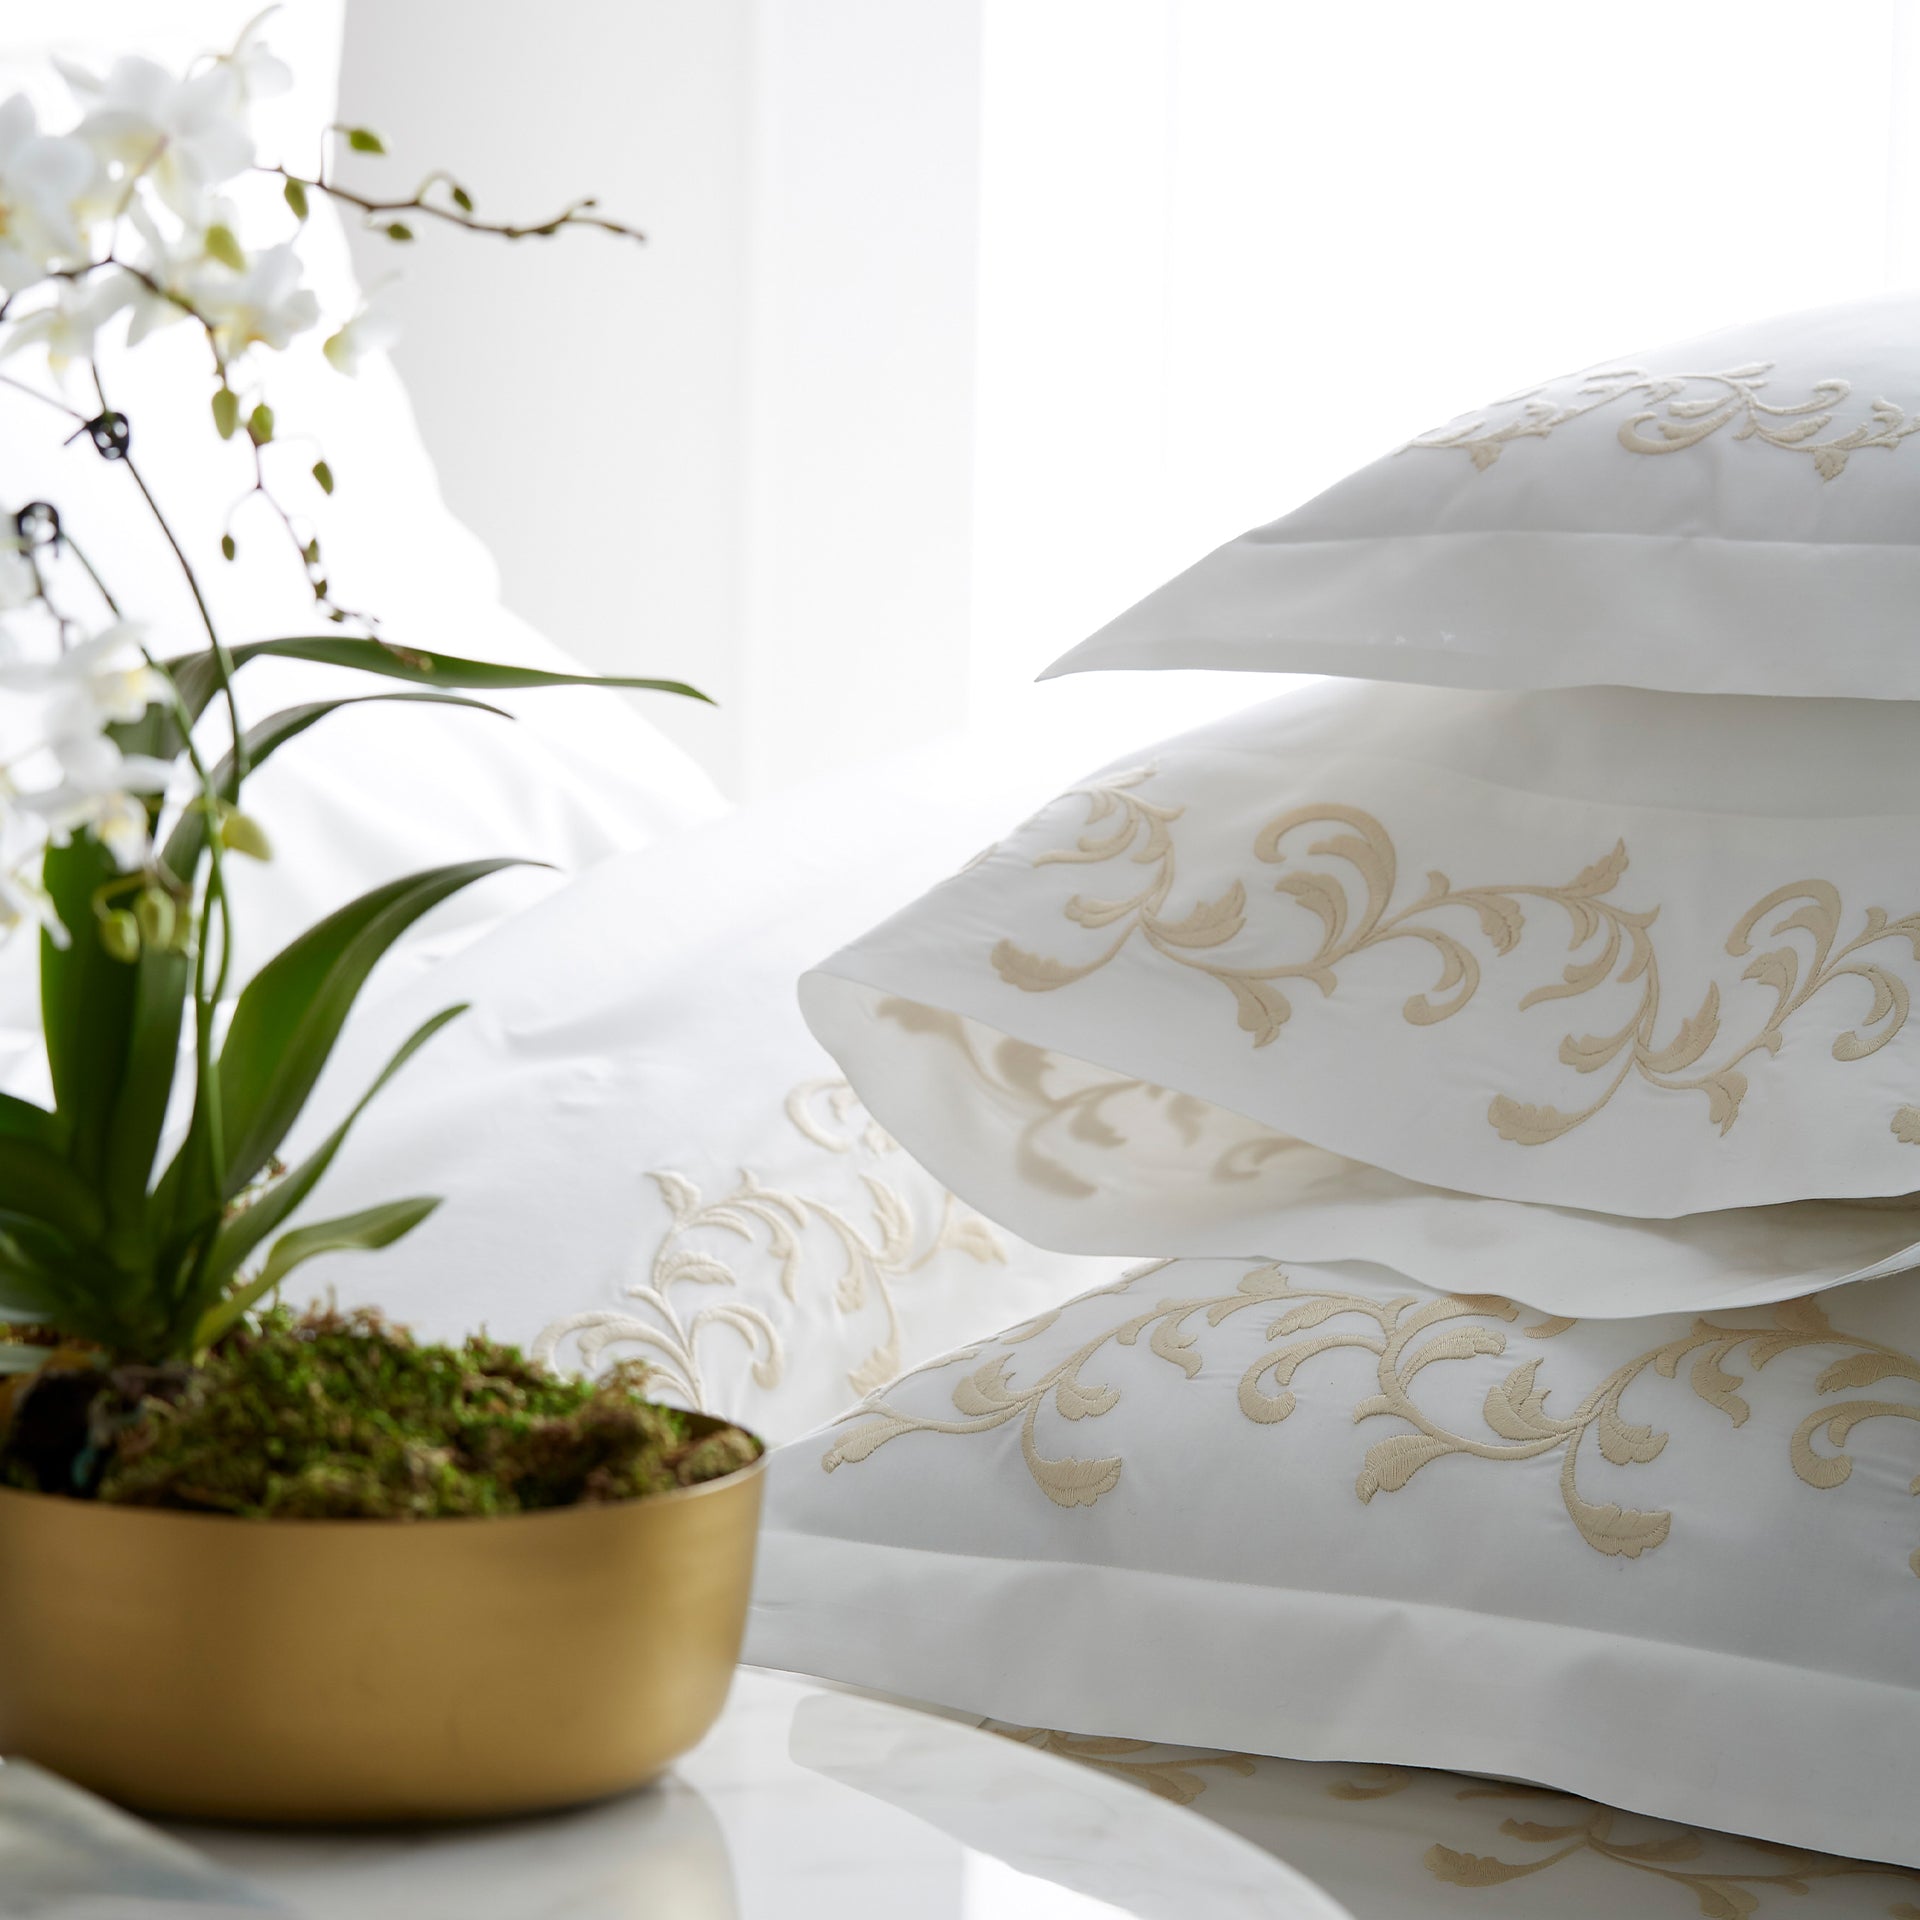 san remo pillowcase showing detail of scroll embroidery detail and hemstitch in the color cornsilk & ivory, #color_cornsilk & ivory